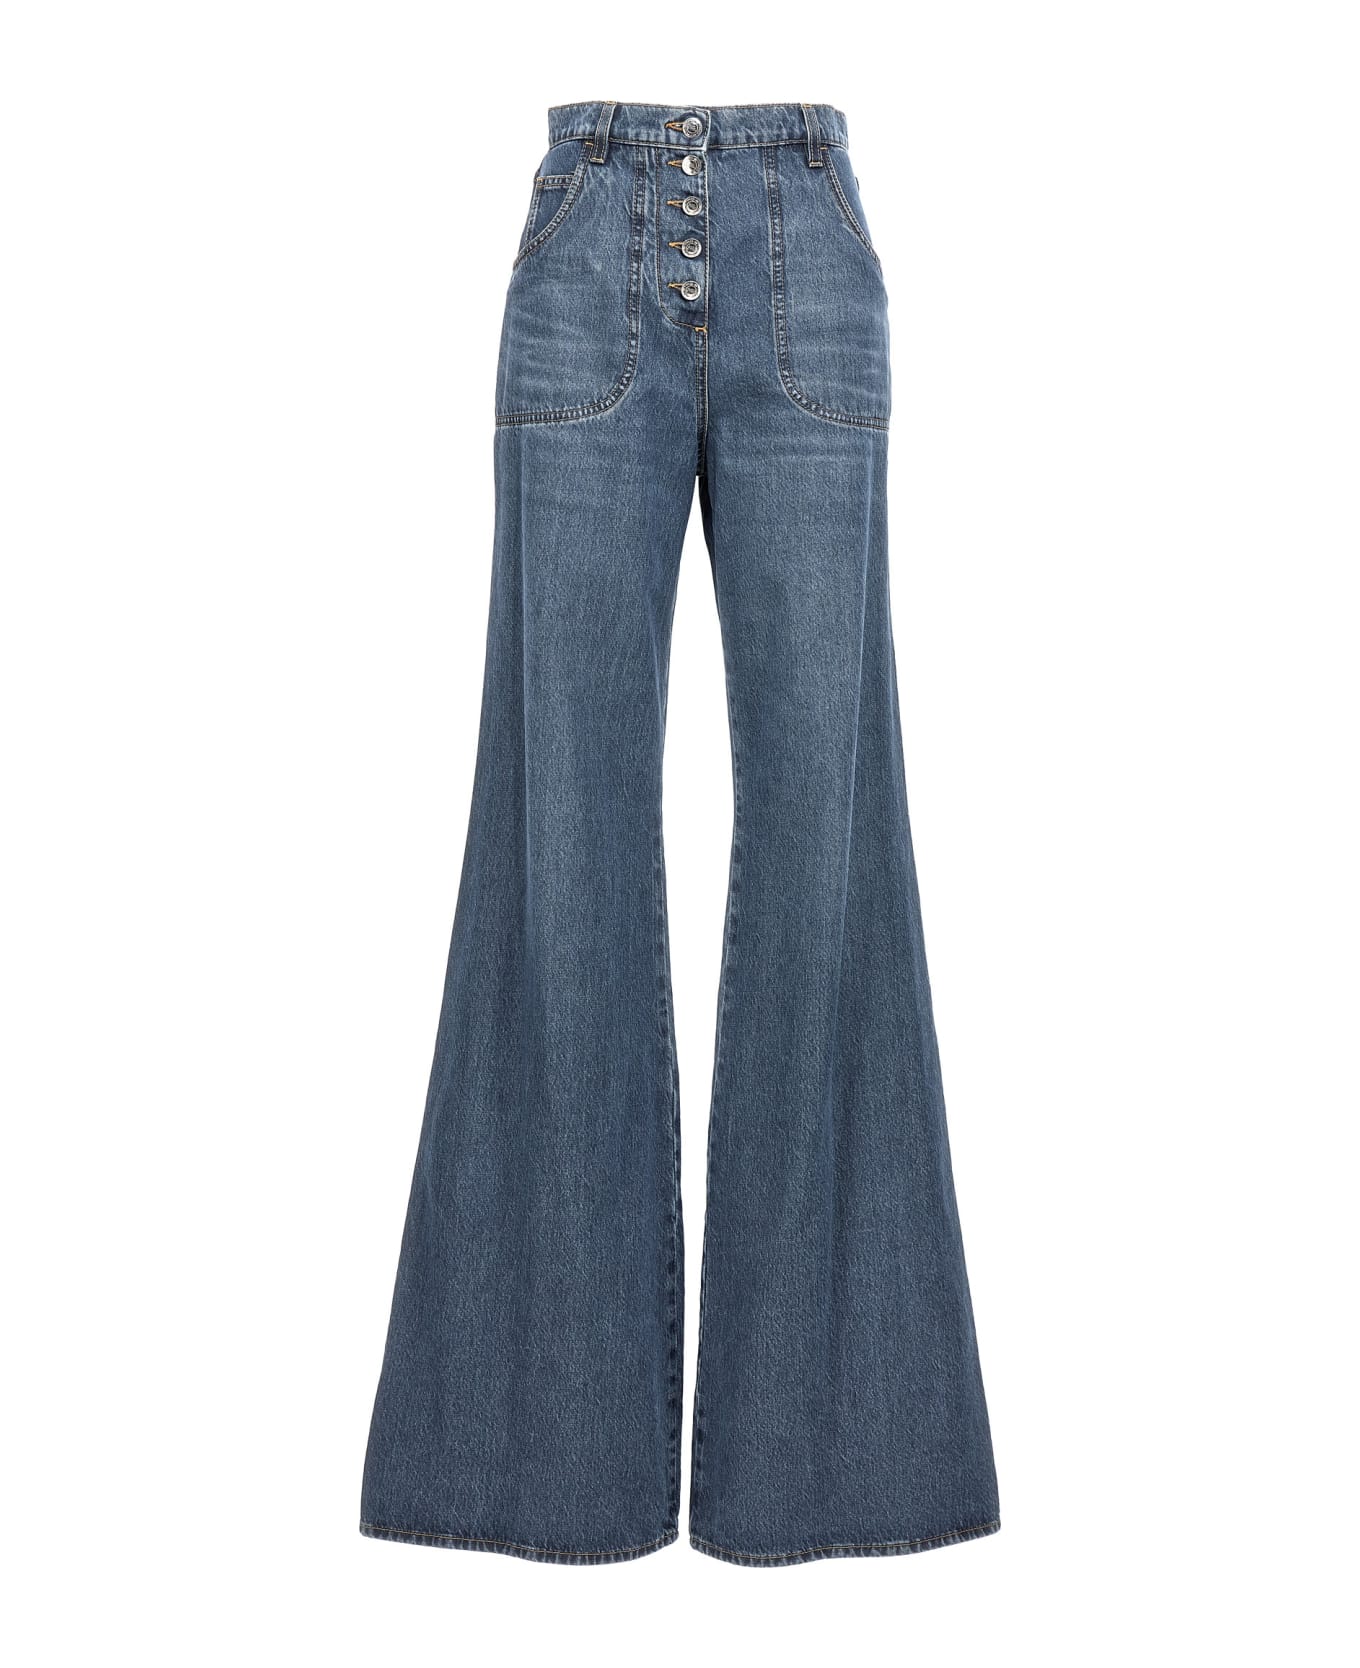 Etro Flared Jeans - Blue